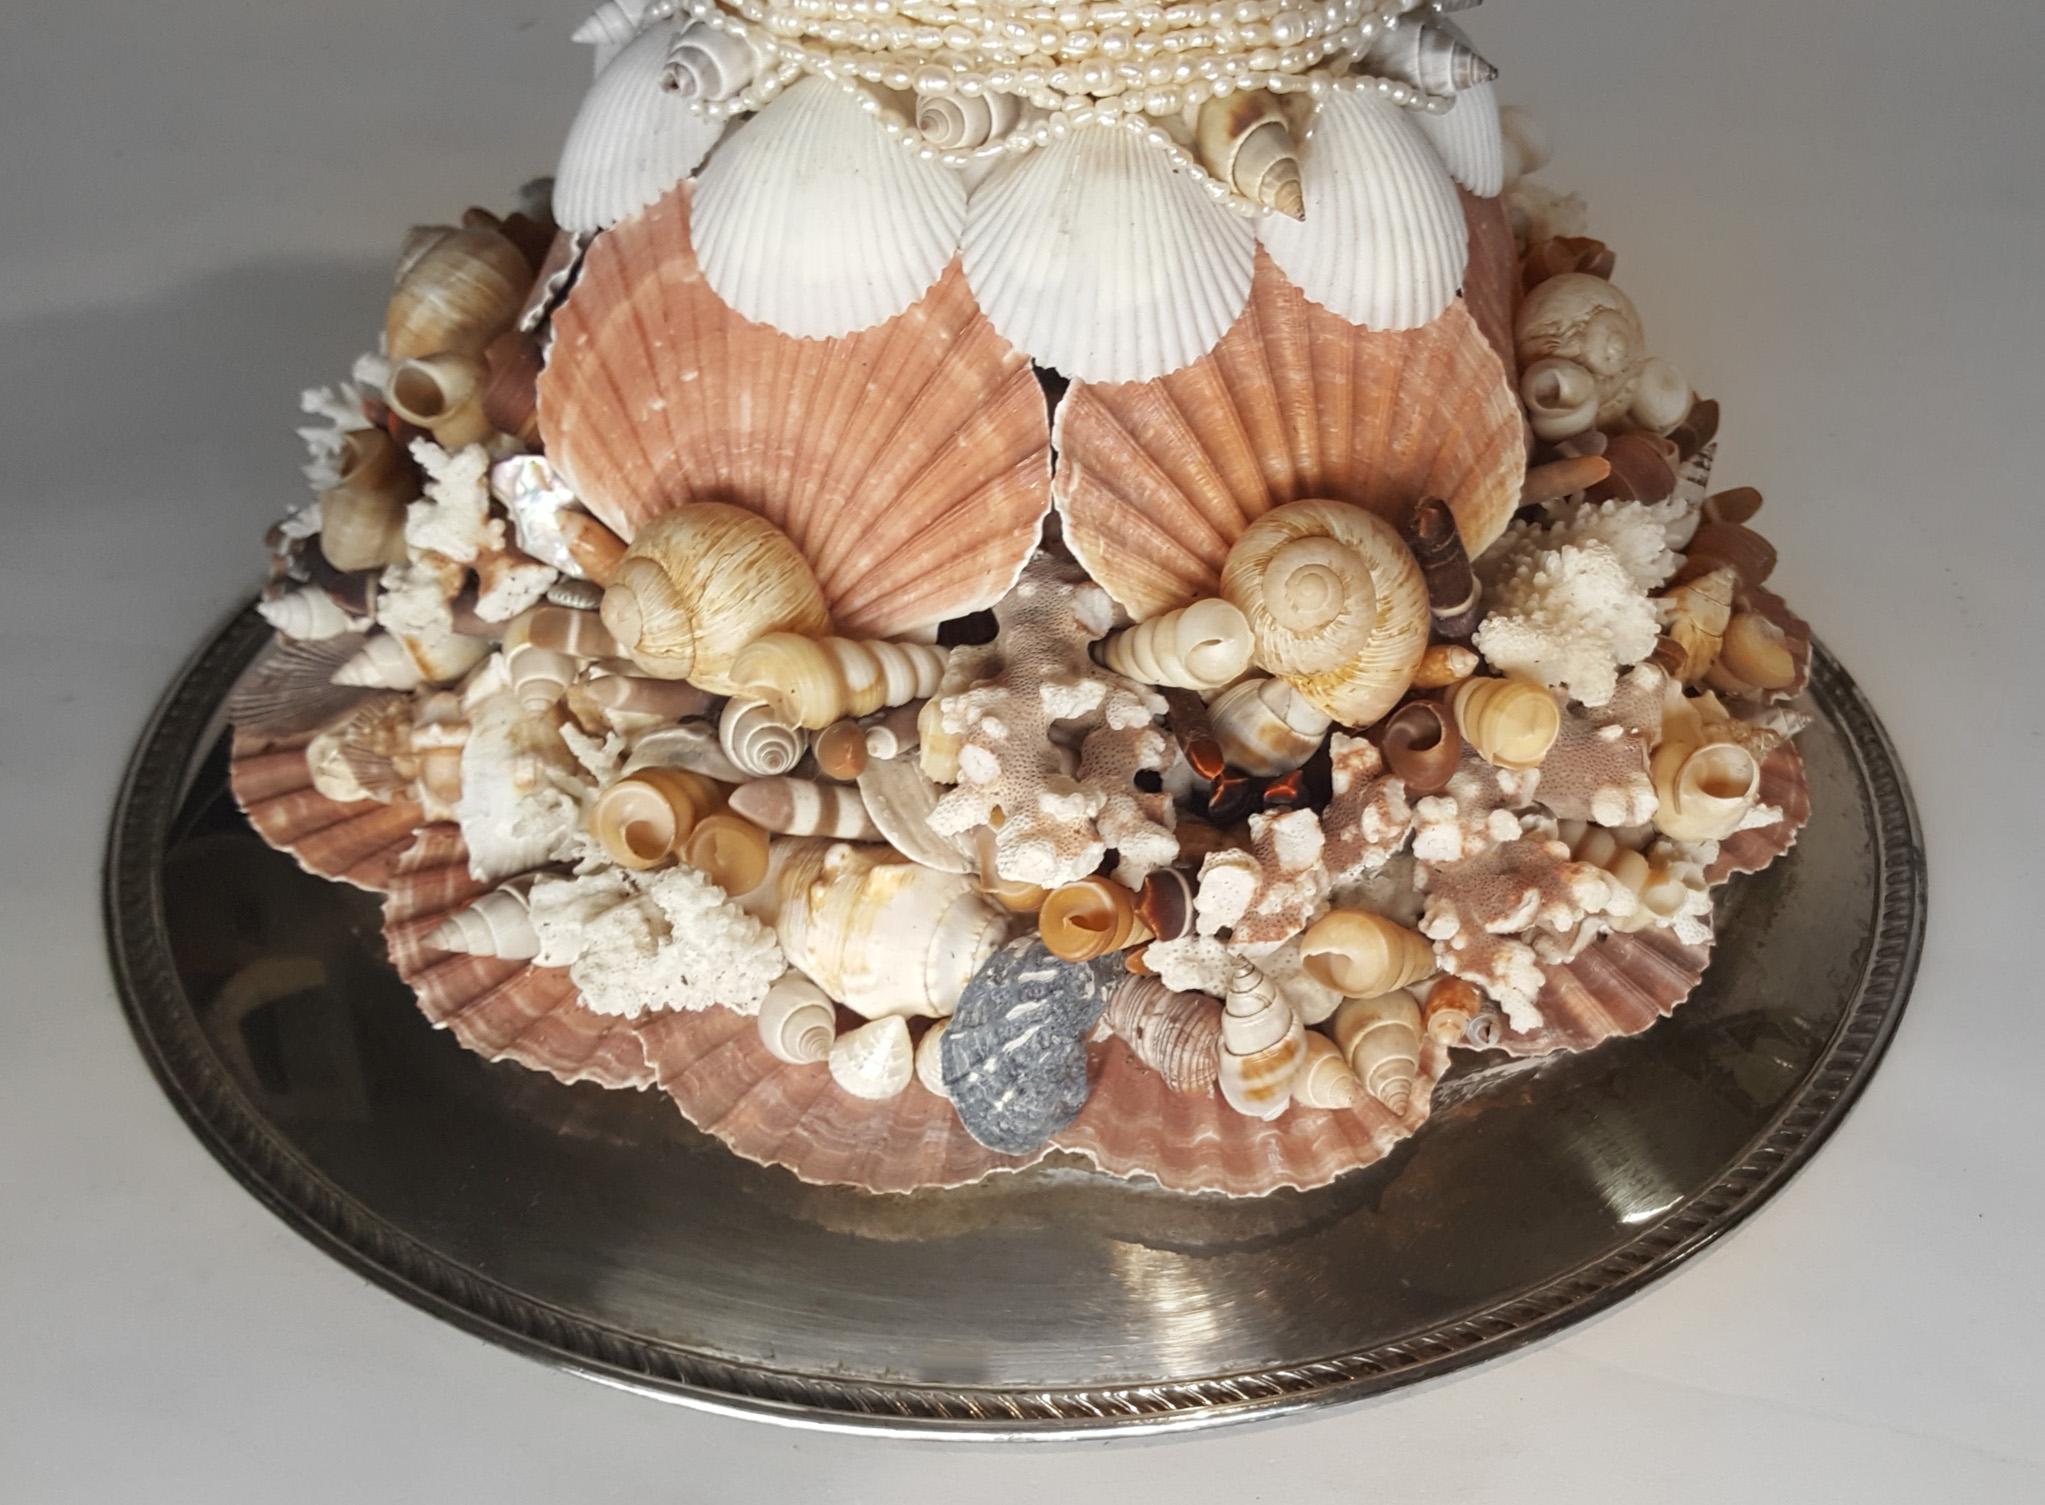 American One-of-a-Kind Handmade Exotic Sea Shell Encrusted Silver Plated Display Pedestal